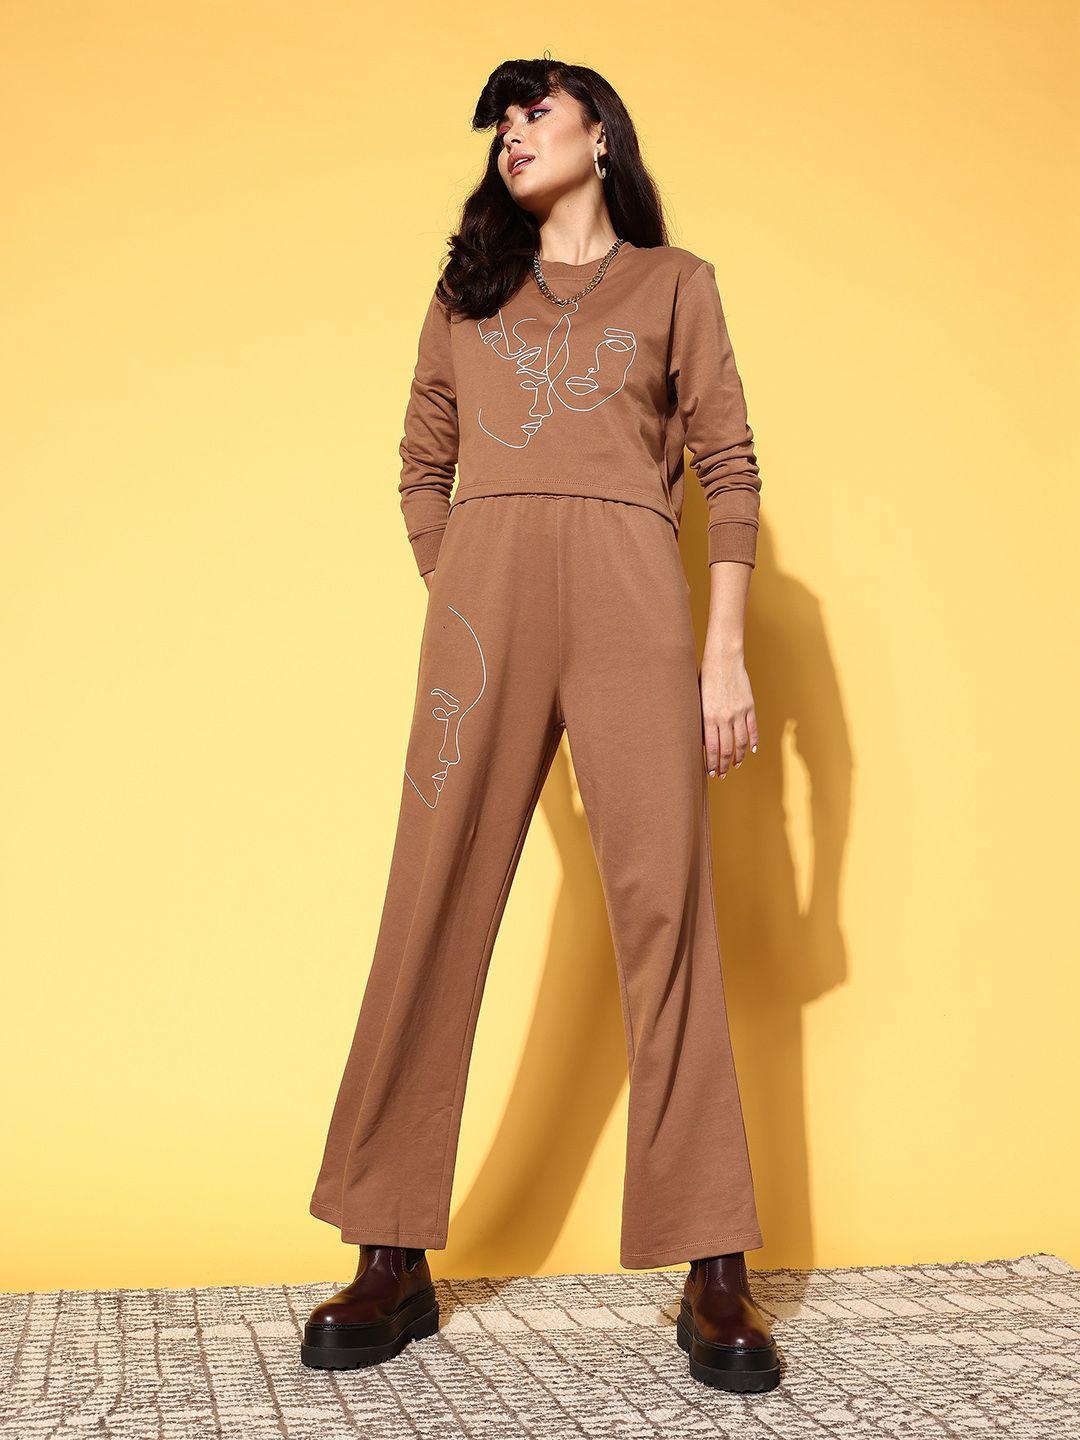 sassafras women chic brown printed sweatshirt with solid trousers